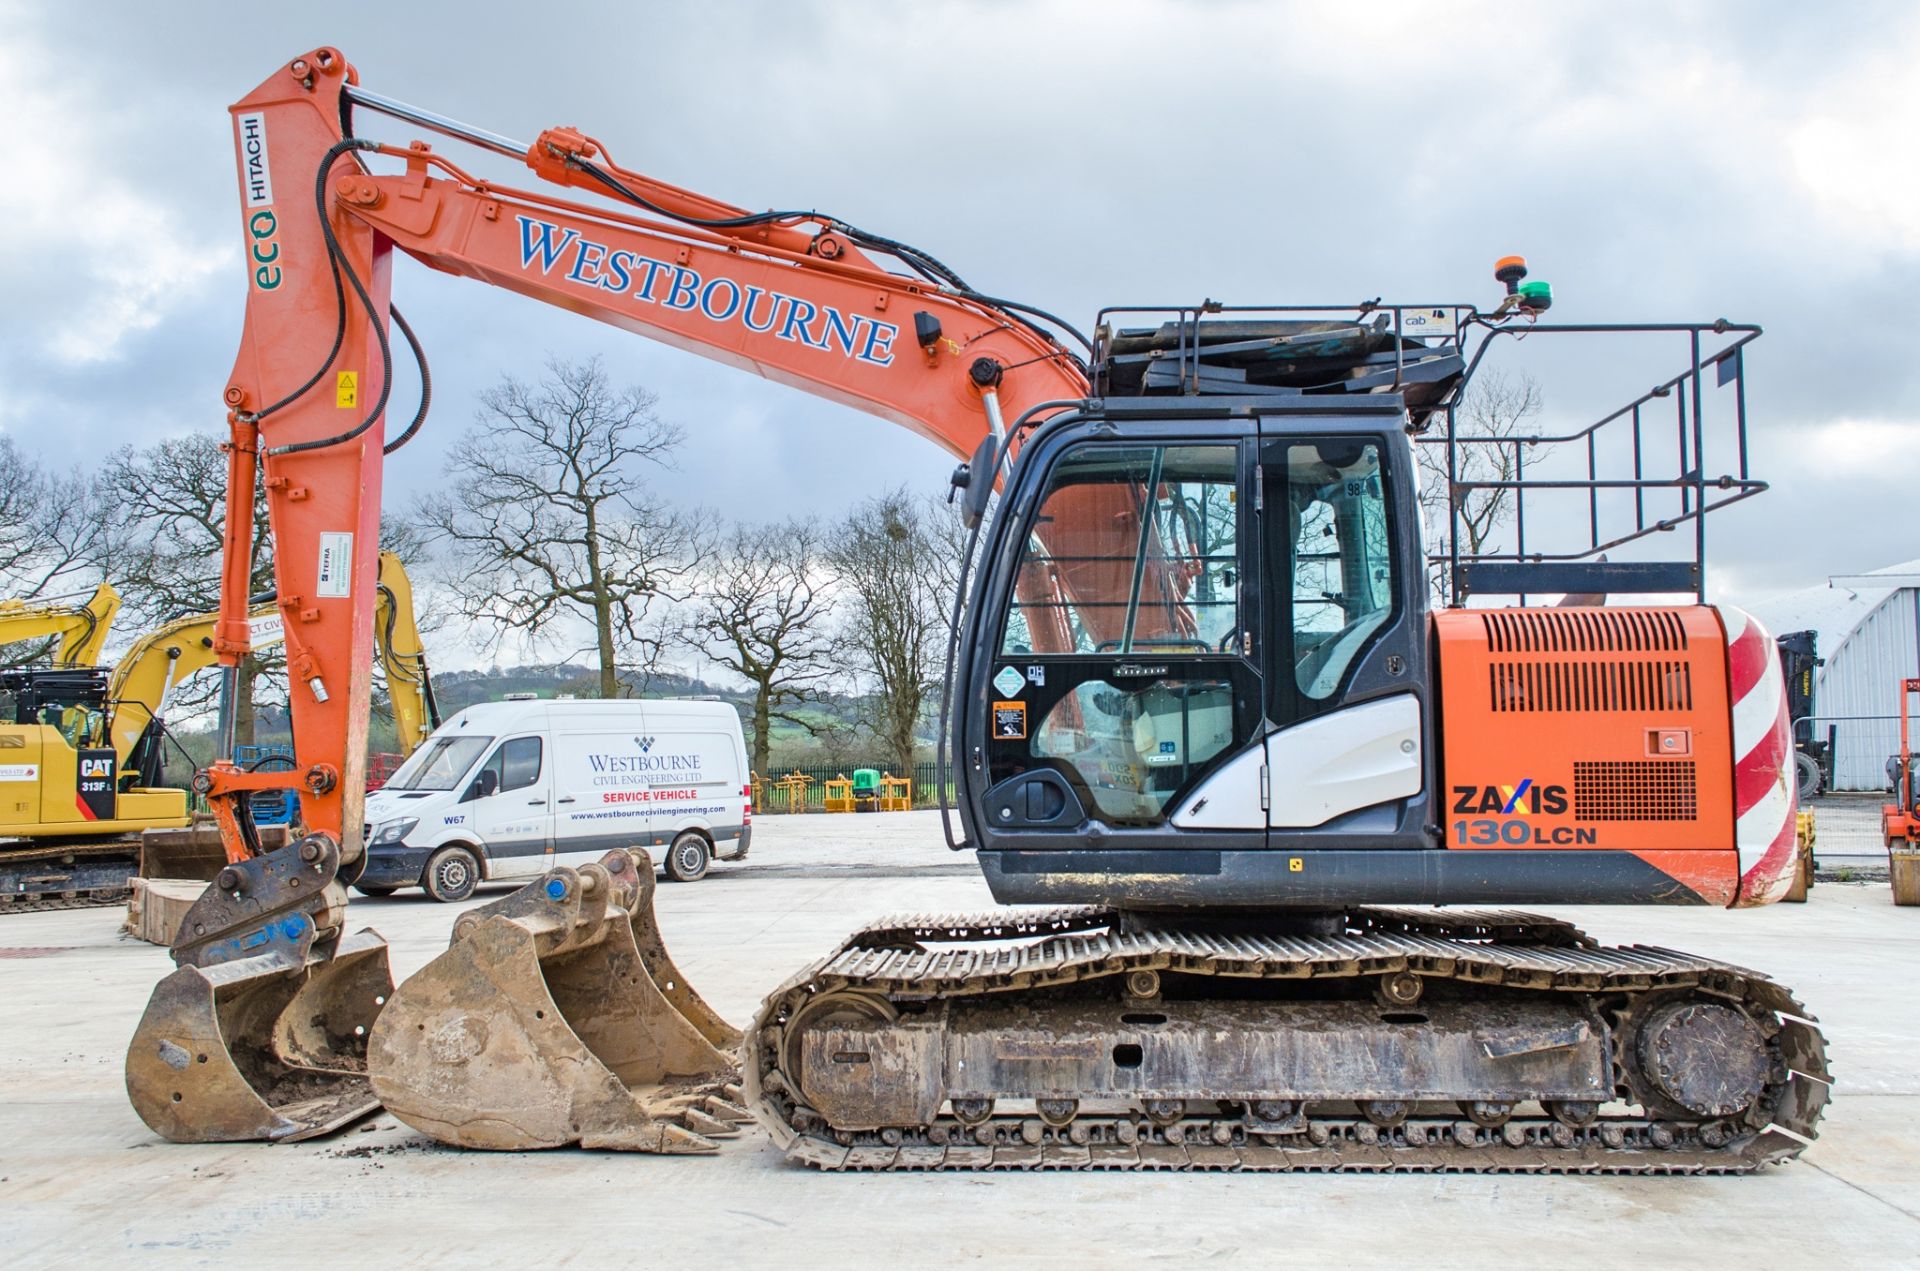 Hitachi ZX 130 LCN-5B 14 tonne steel tracked excavator Year: 2014 S/N: 91931 Recorded hours: 9626 - Image 8 of 27